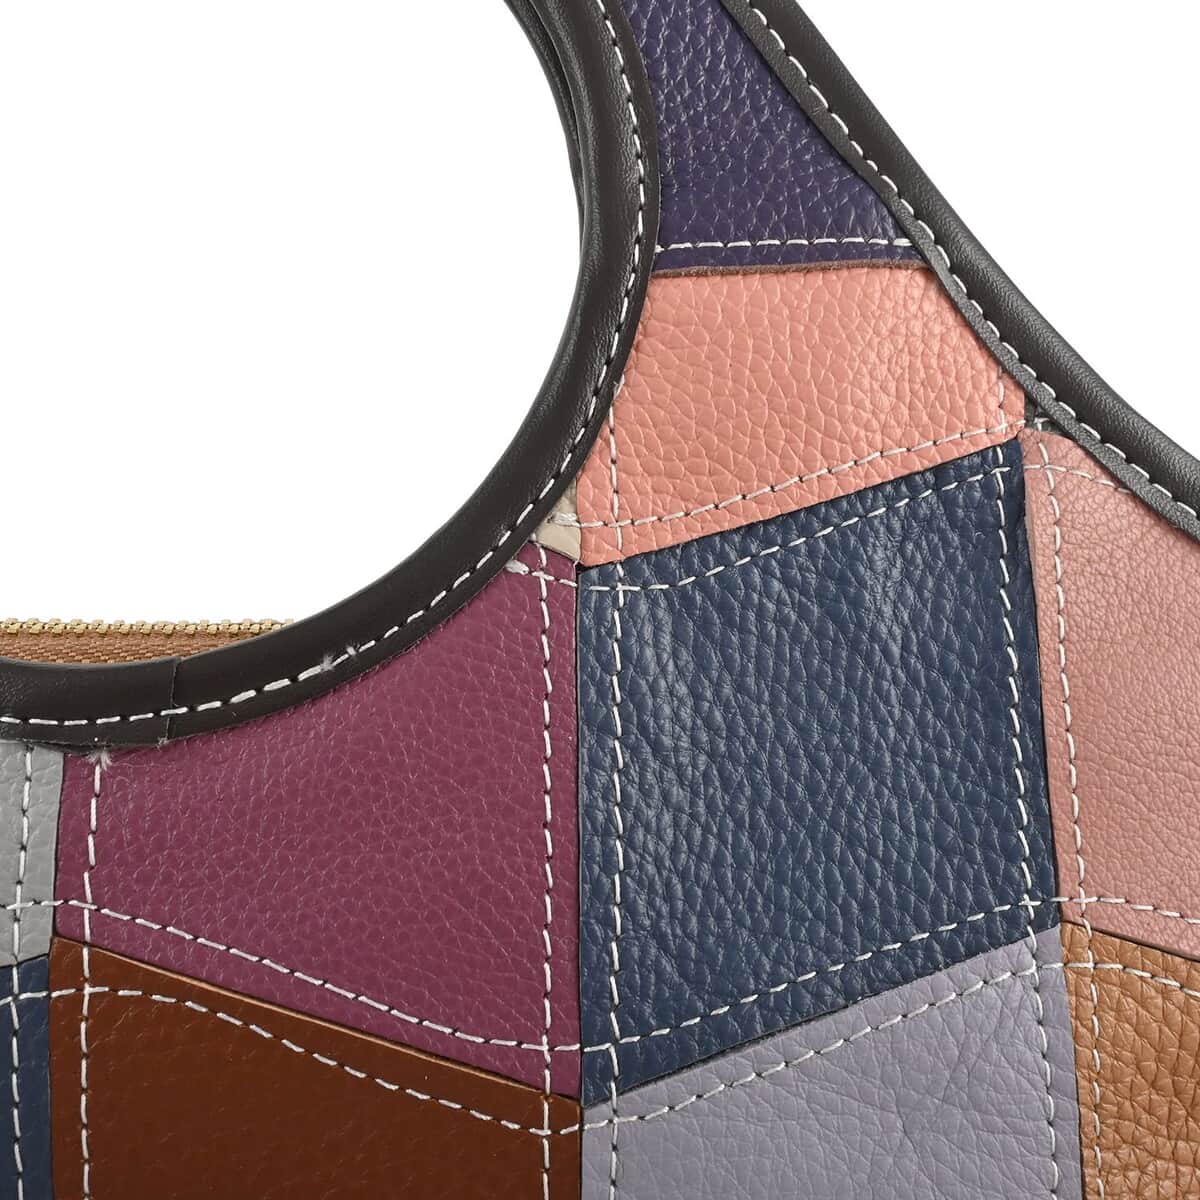 CHAOS Rainbow Solid Color Genuine Leather Convertible Tote Bag (12.5"x5.5"x8.5") with Long Shoulder Strap image number 4